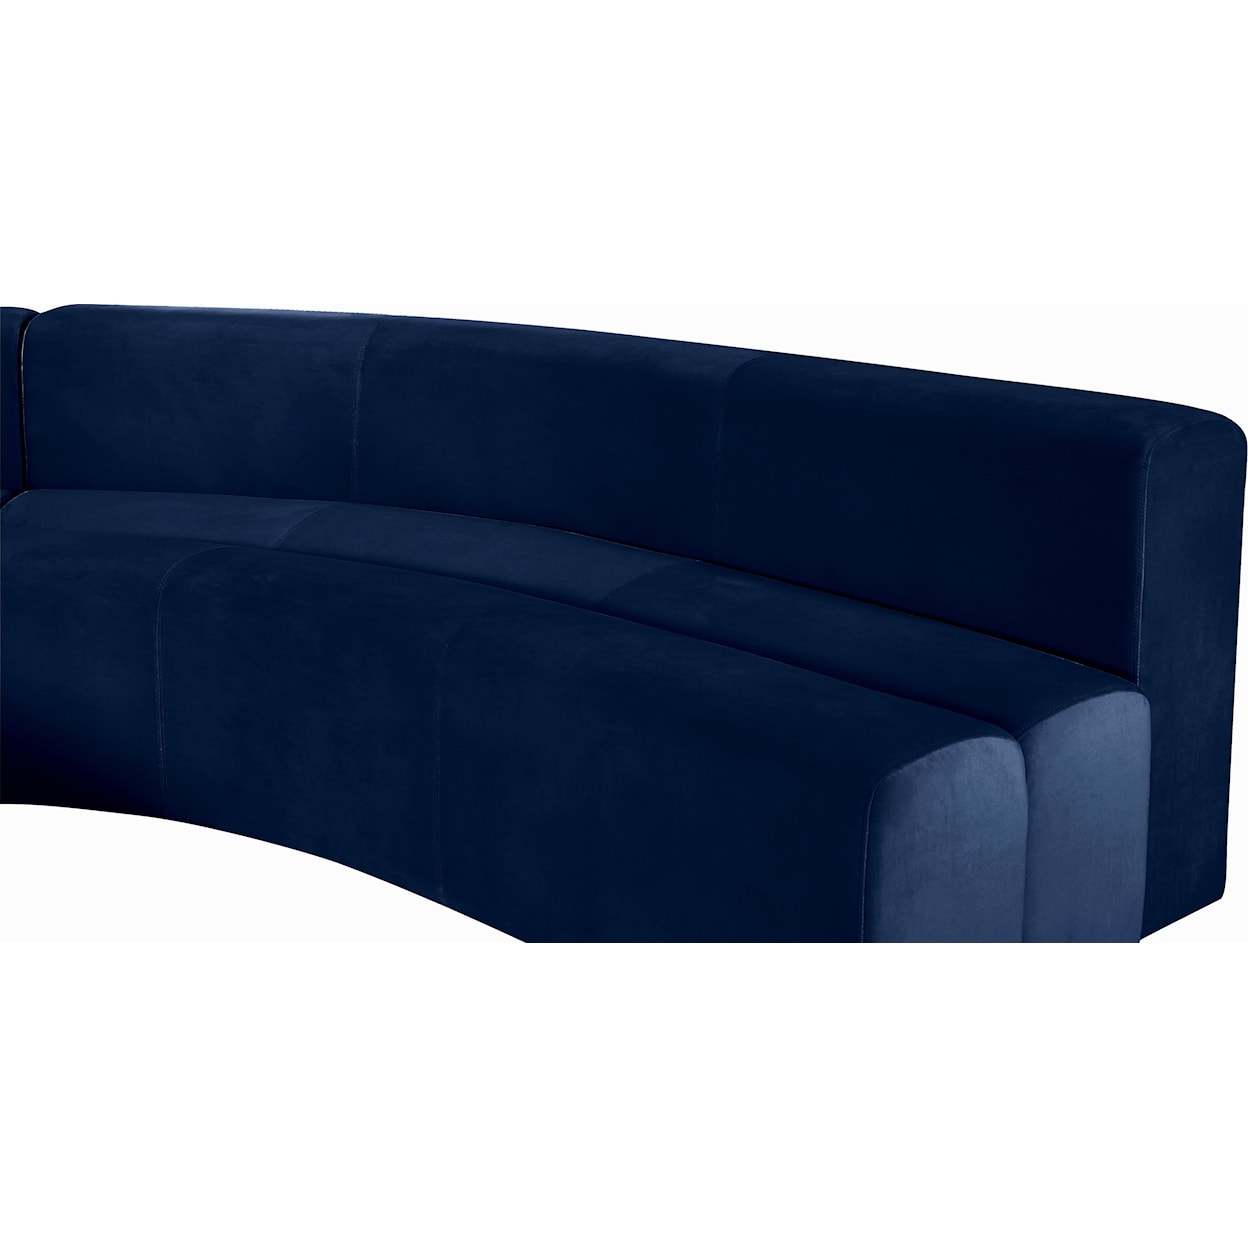 Meridian Furniture Curl 2pc. Sectional